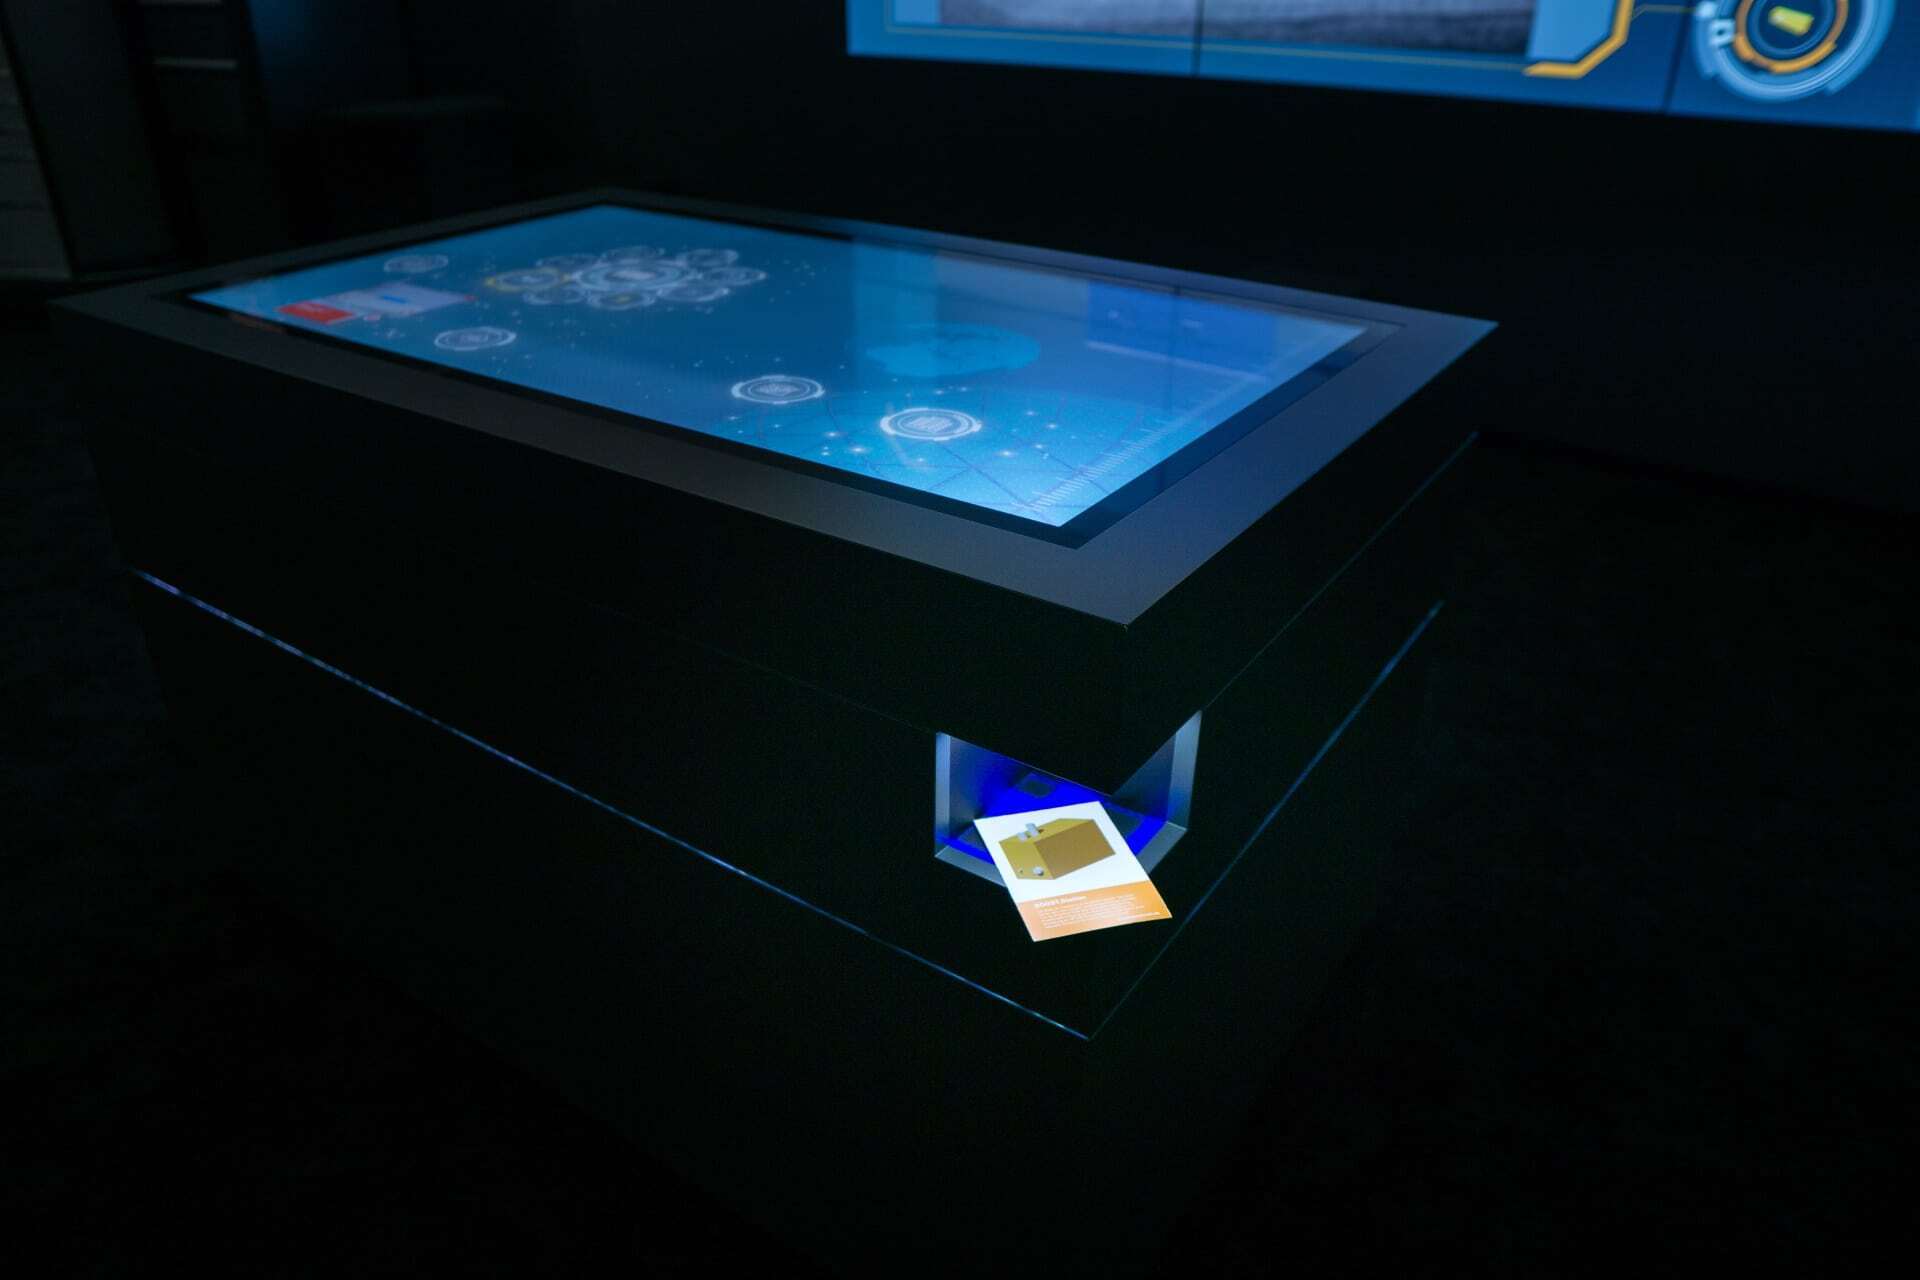 Multitouch table price - what is the cost of multitouch table